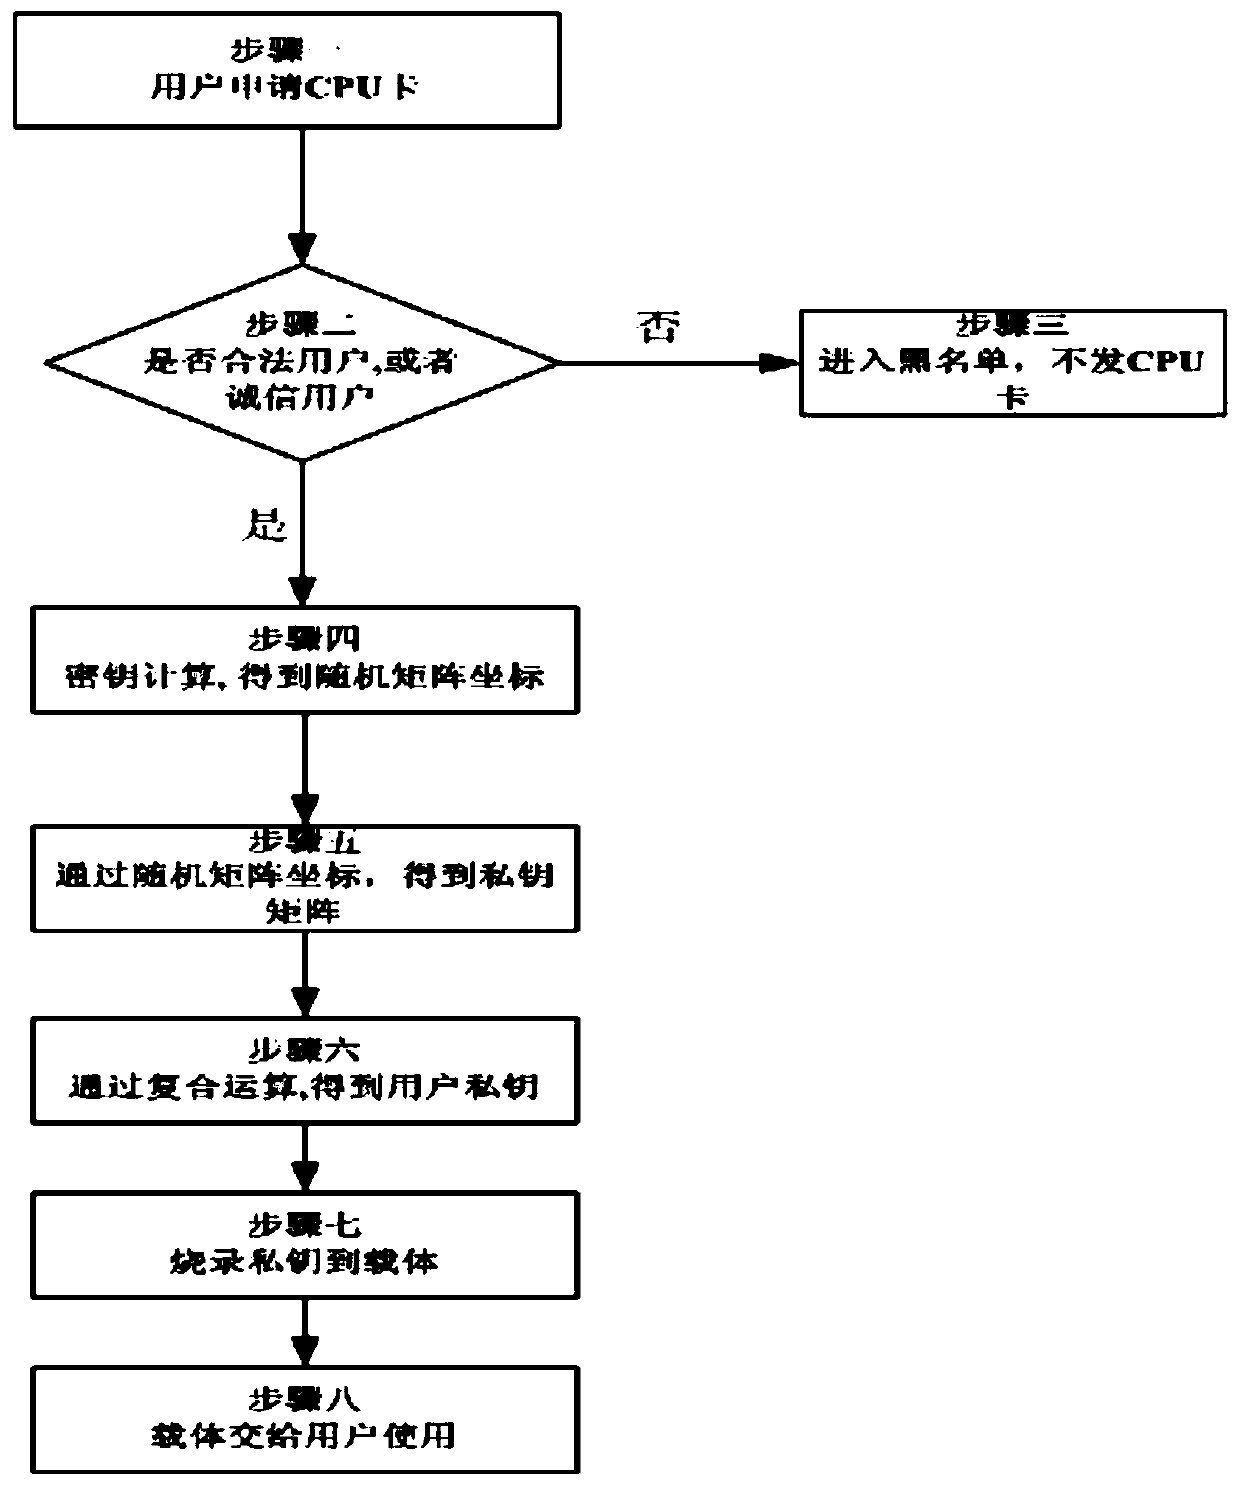 Method based on combined public key authentication microprocessor card cloud management system